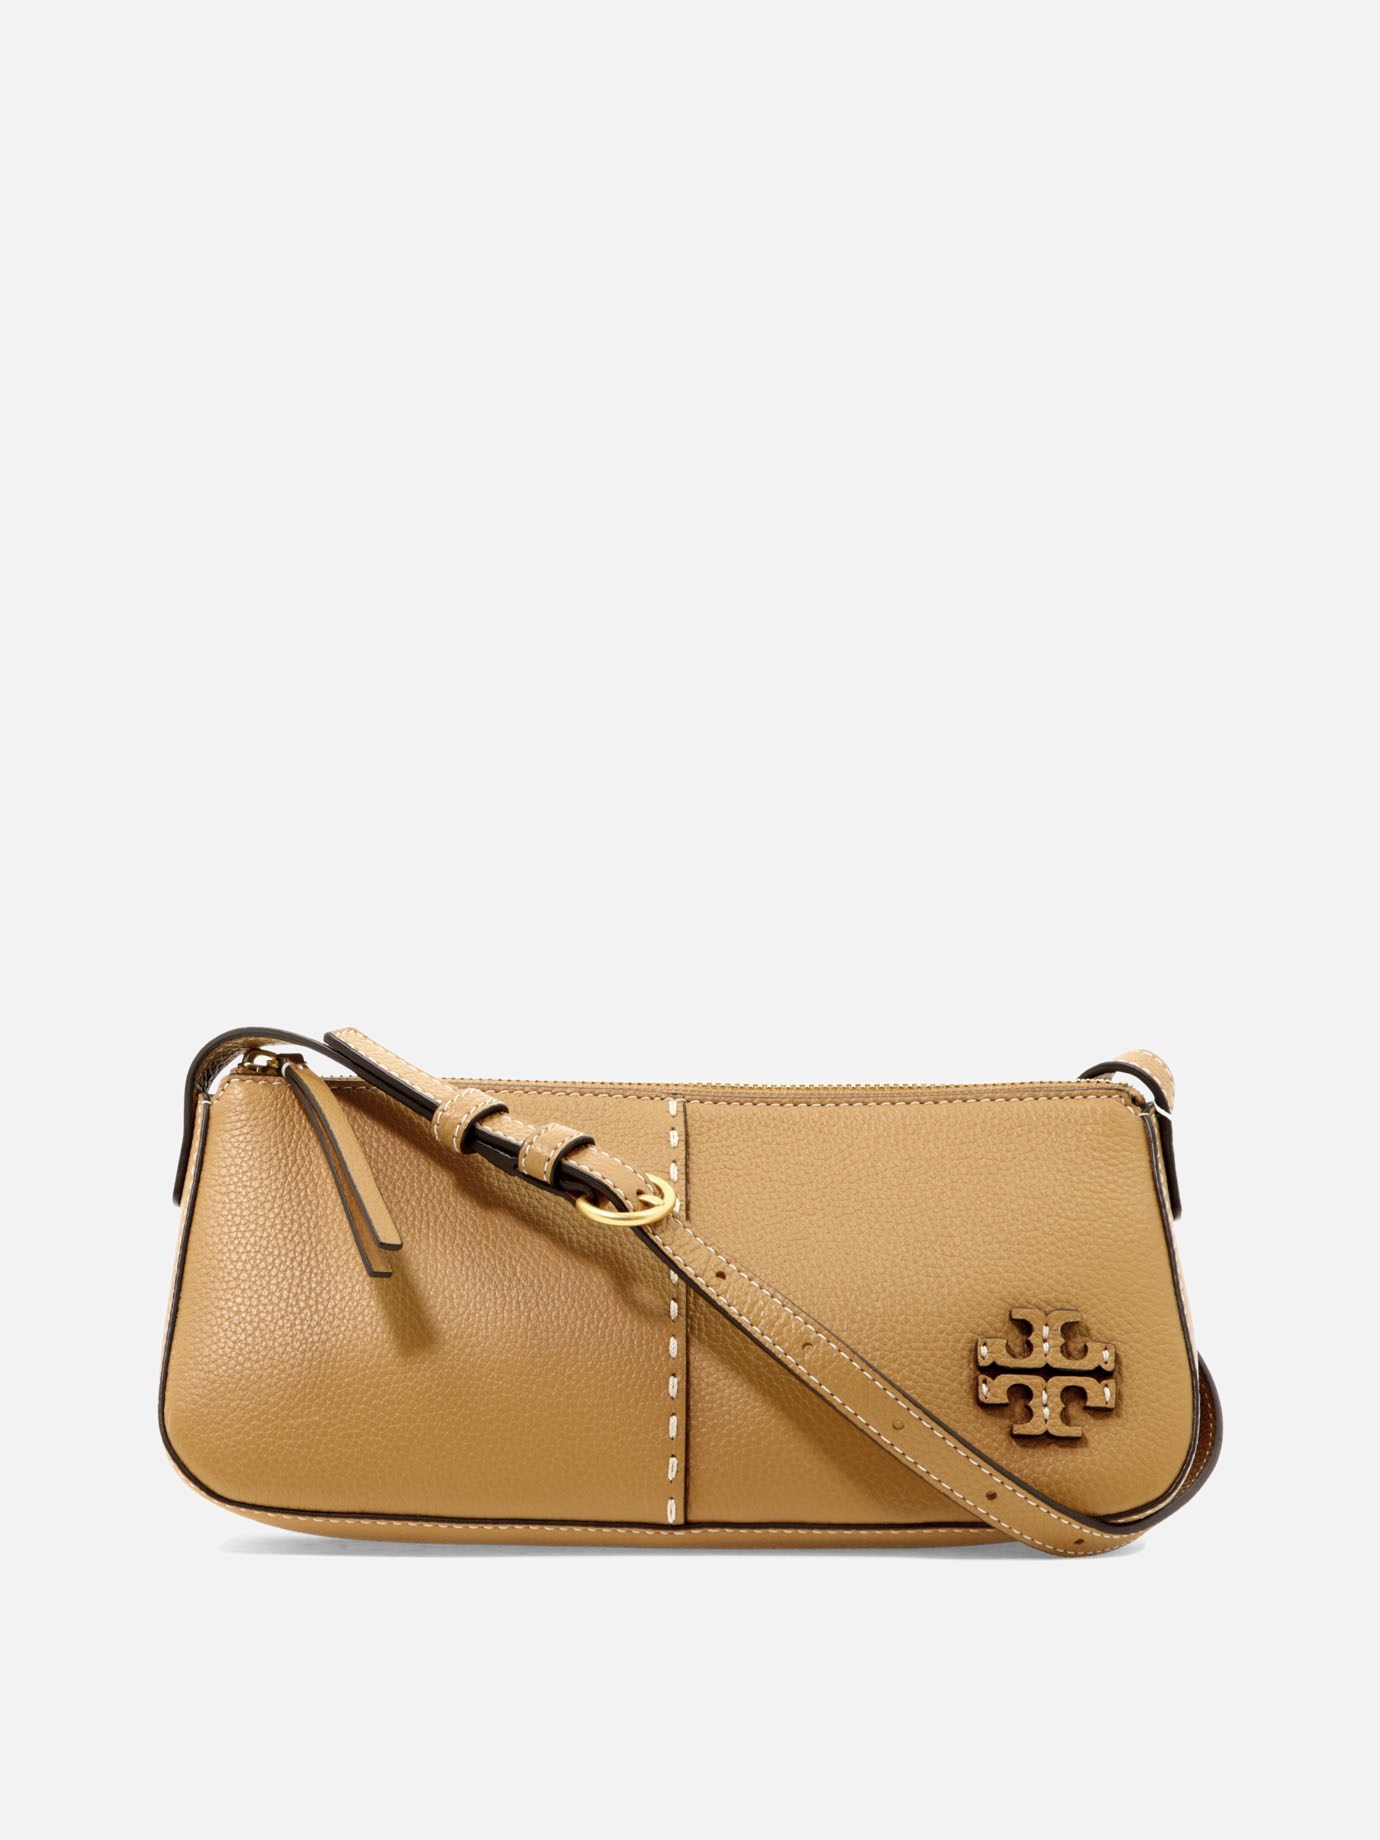  McGraw Wedge  shoulder bagby Tory Burch - 3